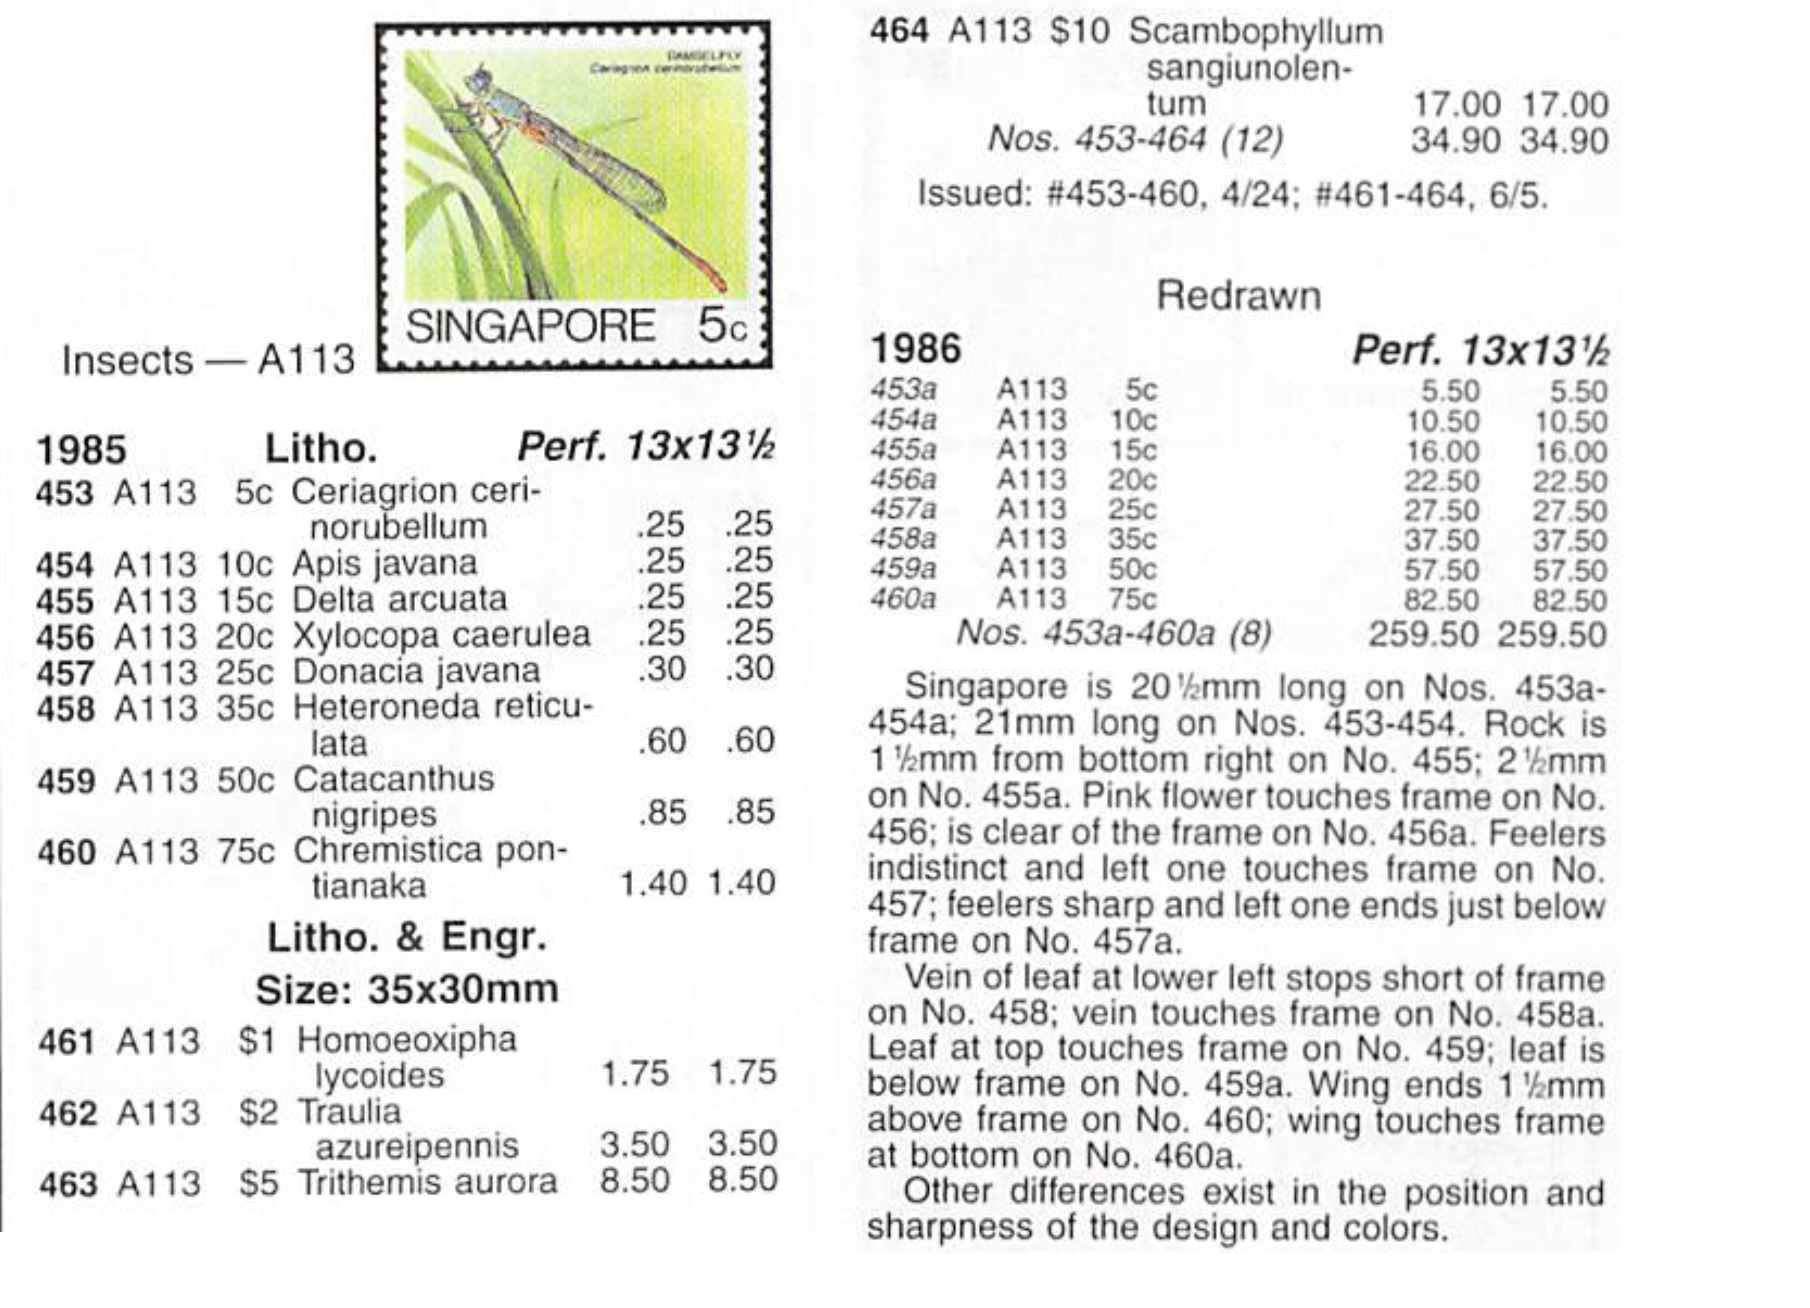 Scott catalogue listing for the 1985 Singapore insect stamps (Scott #453-464 and Scott #453a-460a).